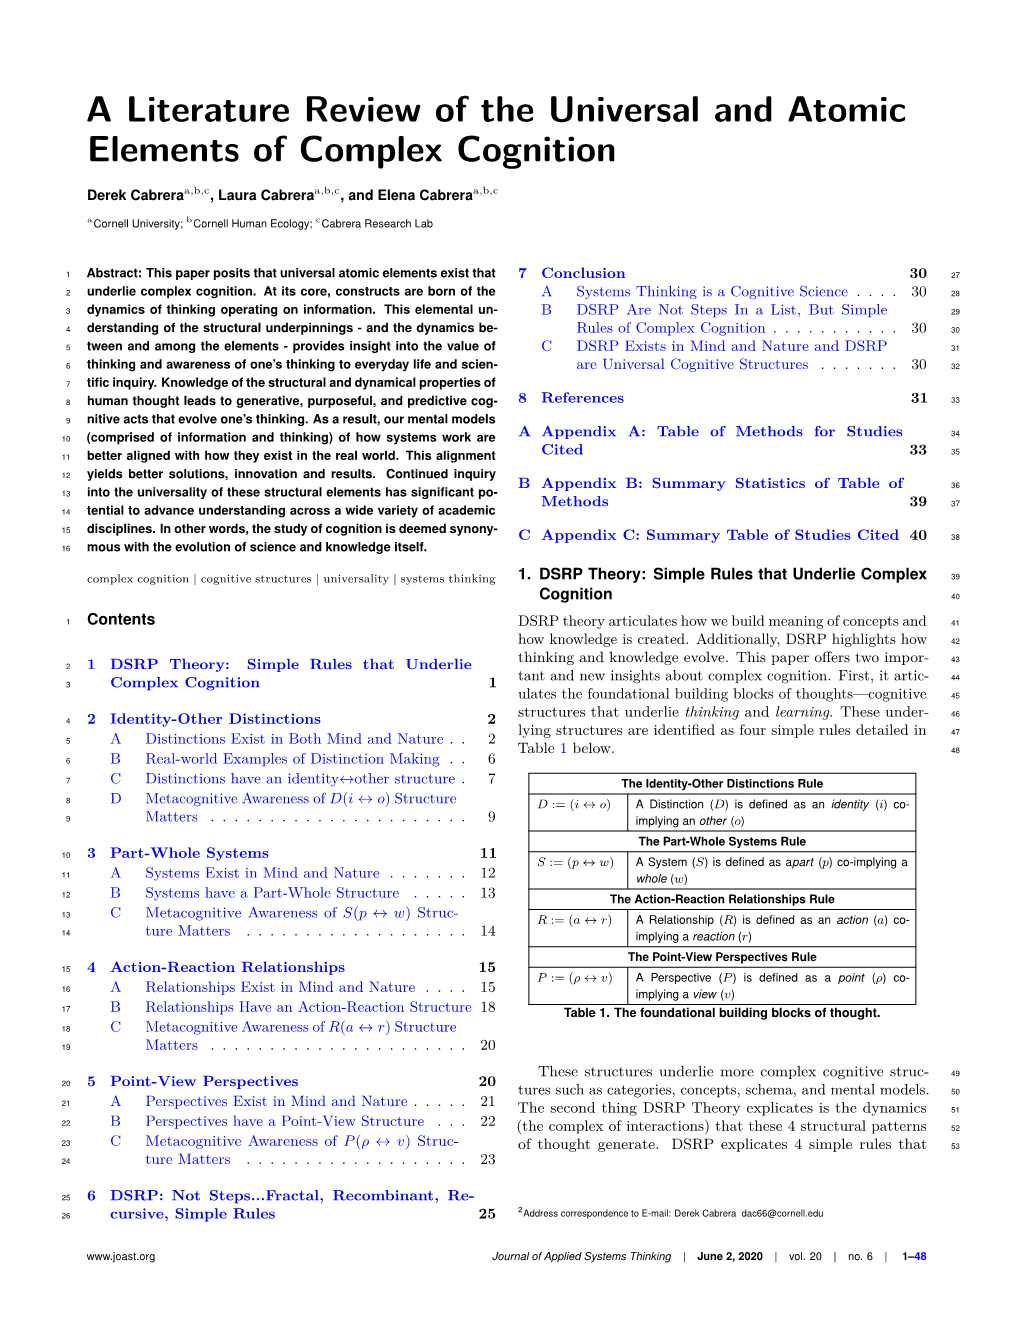 A Literature Review of the Universal and Atomic Elements of Complex Cognition